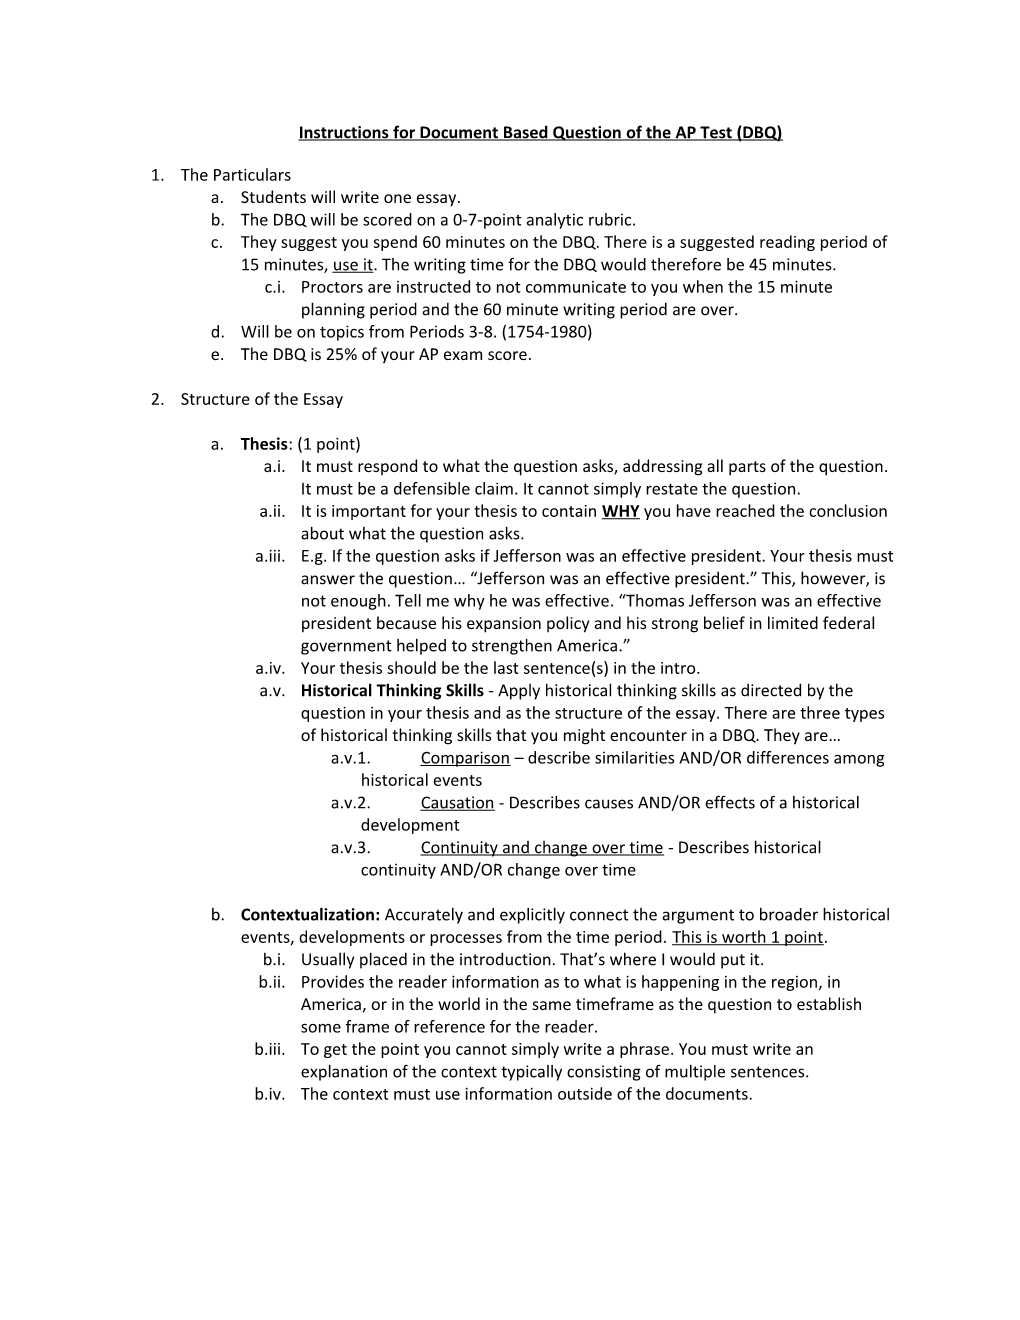 Instructions for Document Based Question of the AP Test (DBQ)